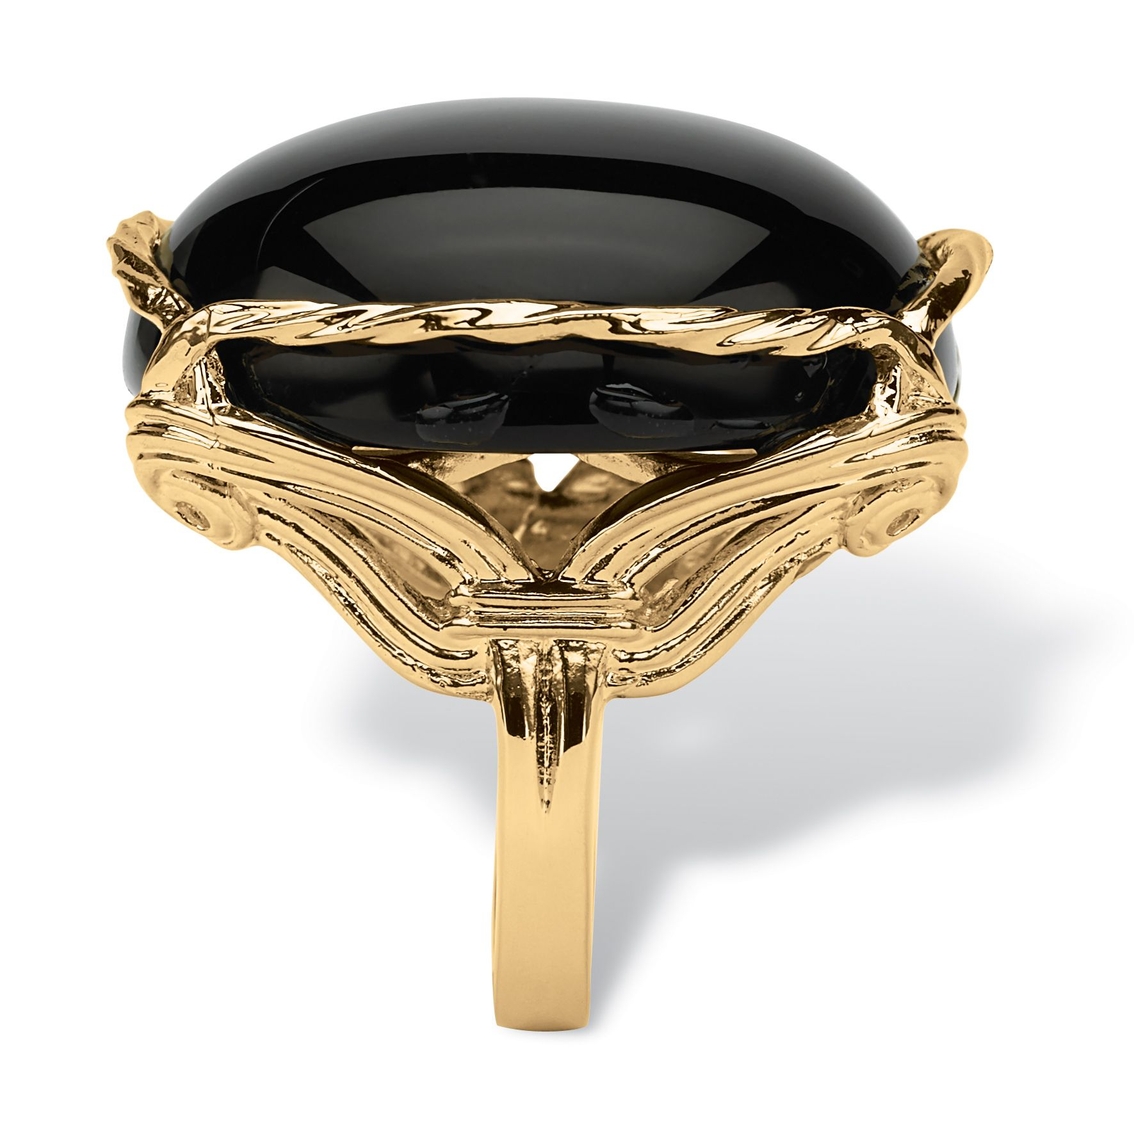 Genuine Black Onyx Gold-Plated Cabochon Pillow Ring - Image 2 of 5